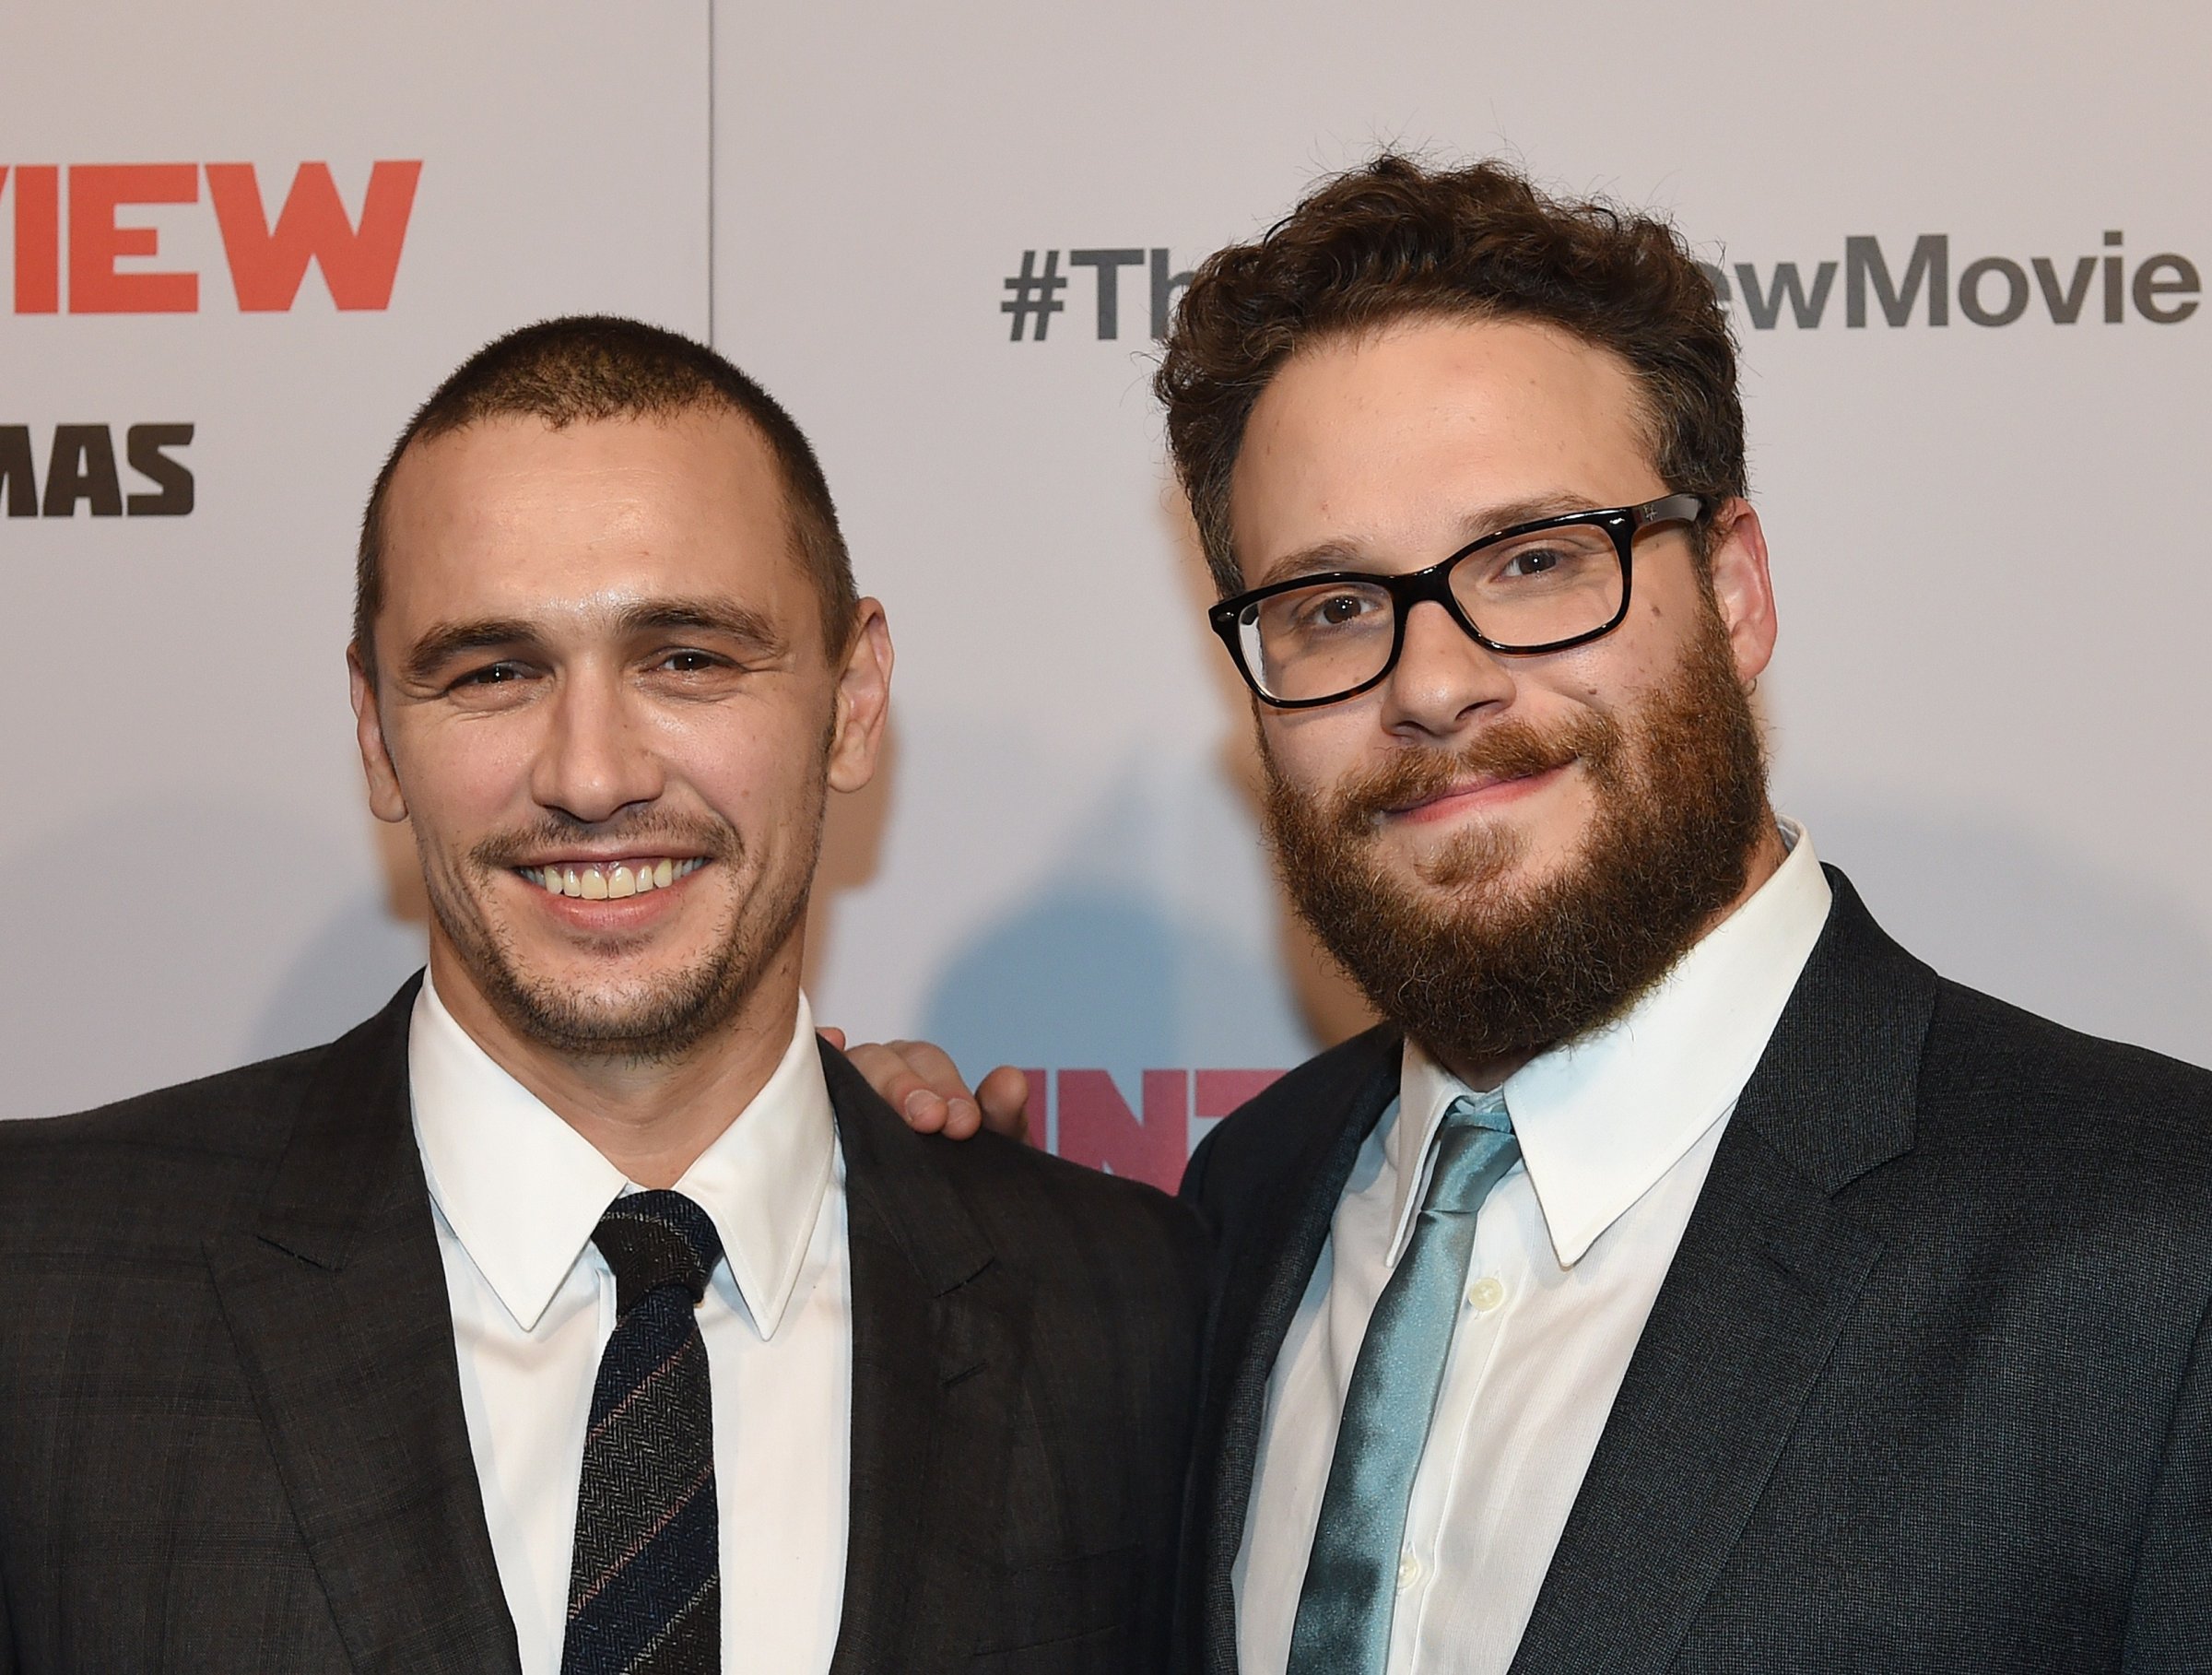 Actors James Franco (L) and Seth Rogen at the premiere of the film "The Interview" in Los Angeles, Ca. on Dec. 11, 2014.